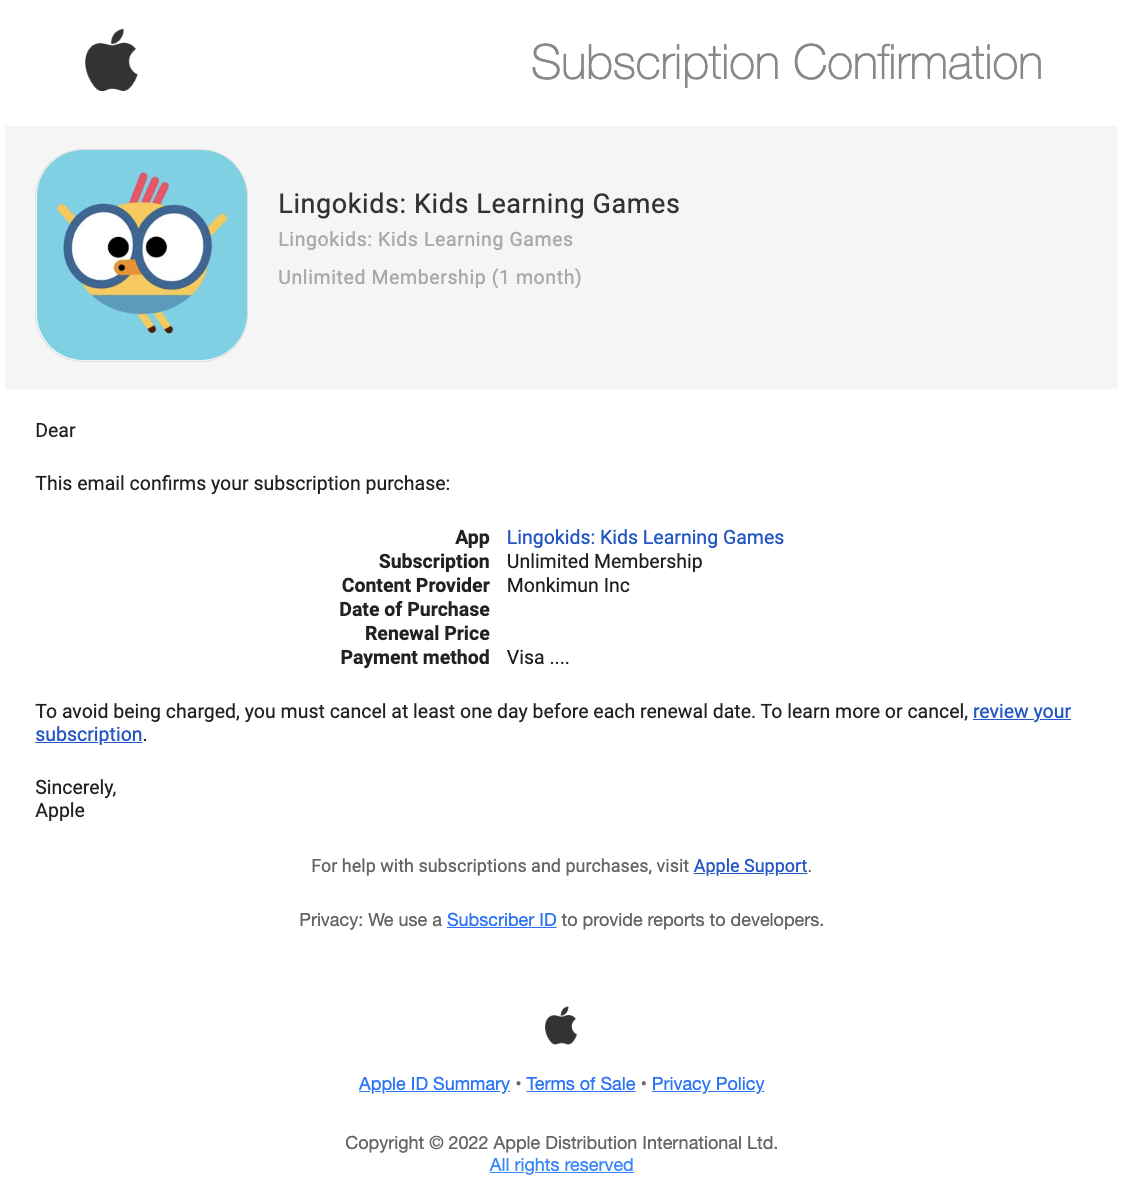 Apple_subscription_confirmation.png